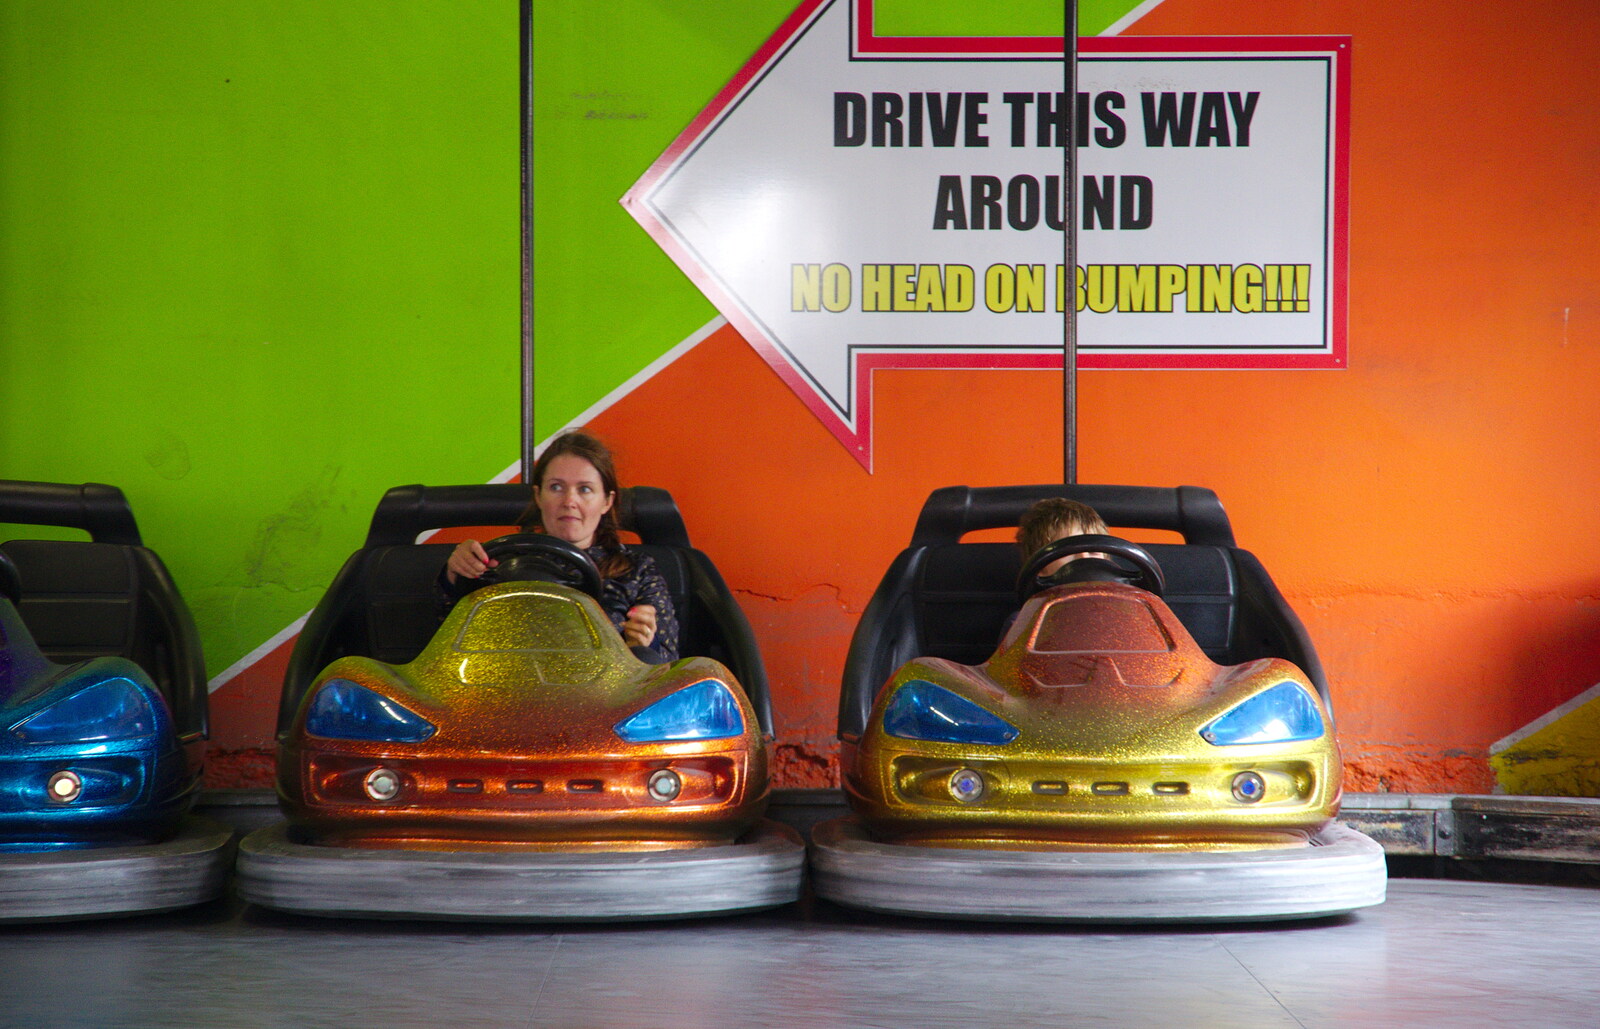 Isobel looks pensive on the dodgems from A Day in Derry, County Londonderry, Northern Ireland - 15th August 2019